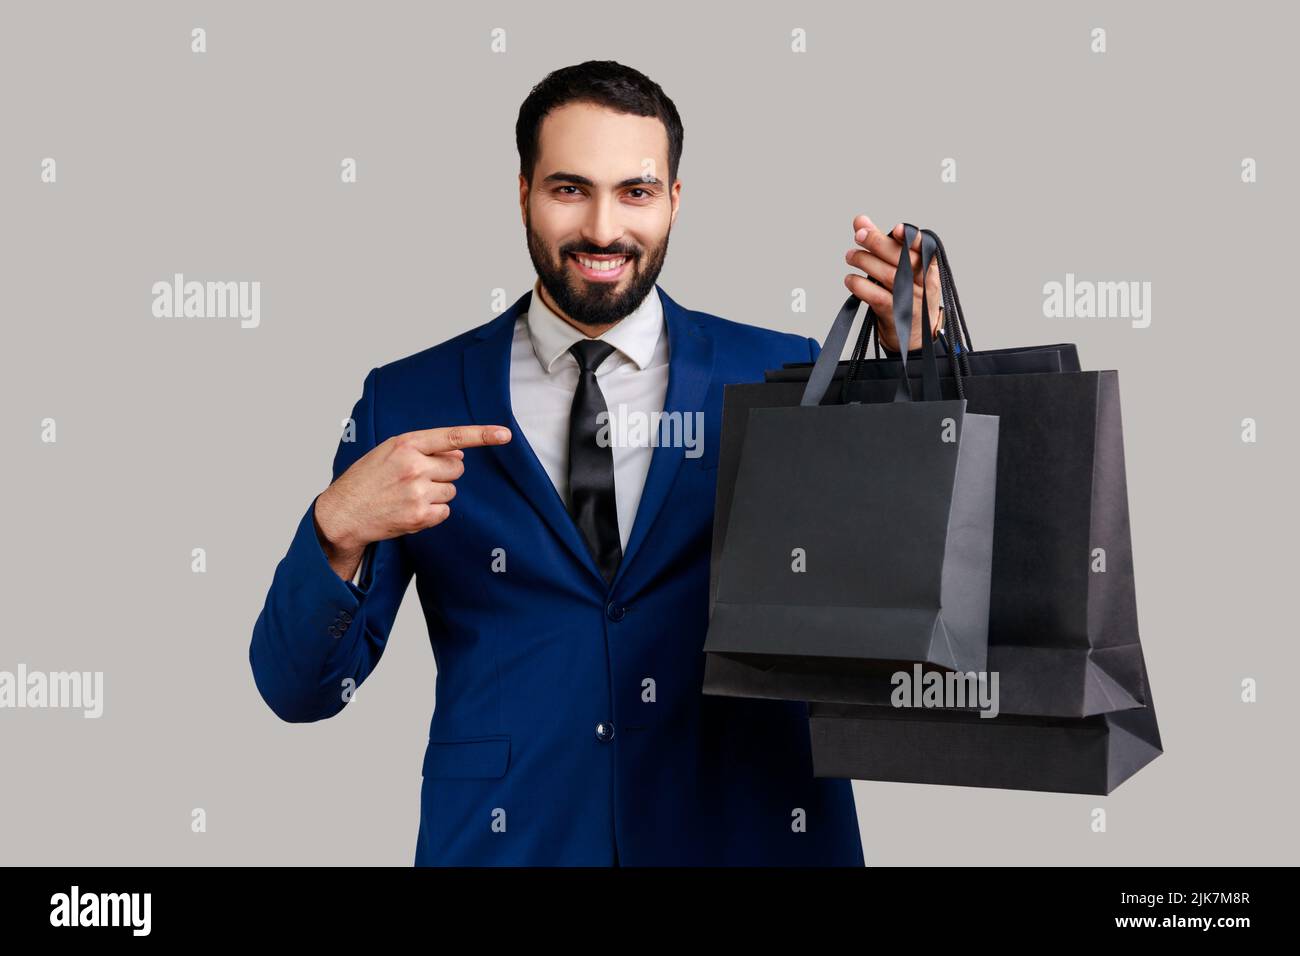 Delighted bearded man pointing finger at paper bags in hand, looking with toothy smile, shopping and sale, wearing official style suit. Indoor studio shot isolated on gray background. Stock Photo